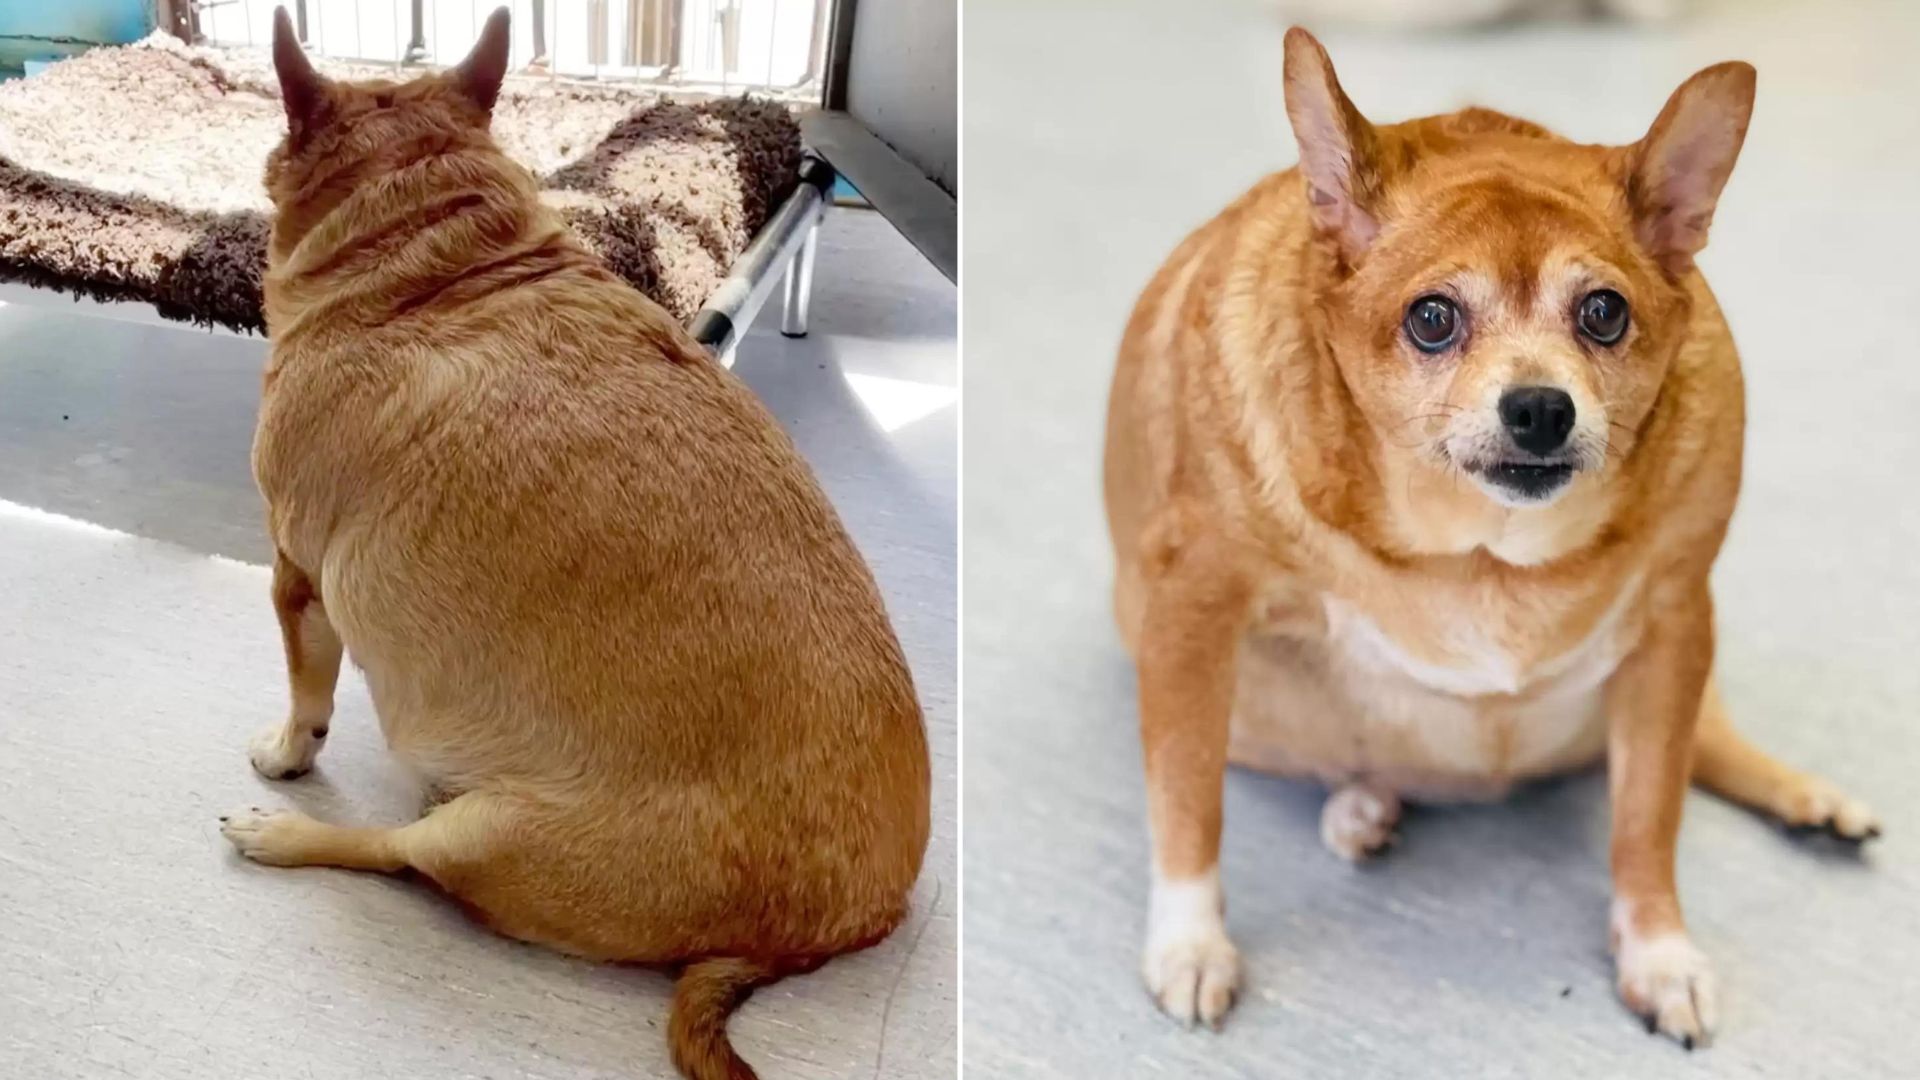 Watch This 30-Pound Chihuahua Make An Amazing Transformation On Her Weight Loss Journey